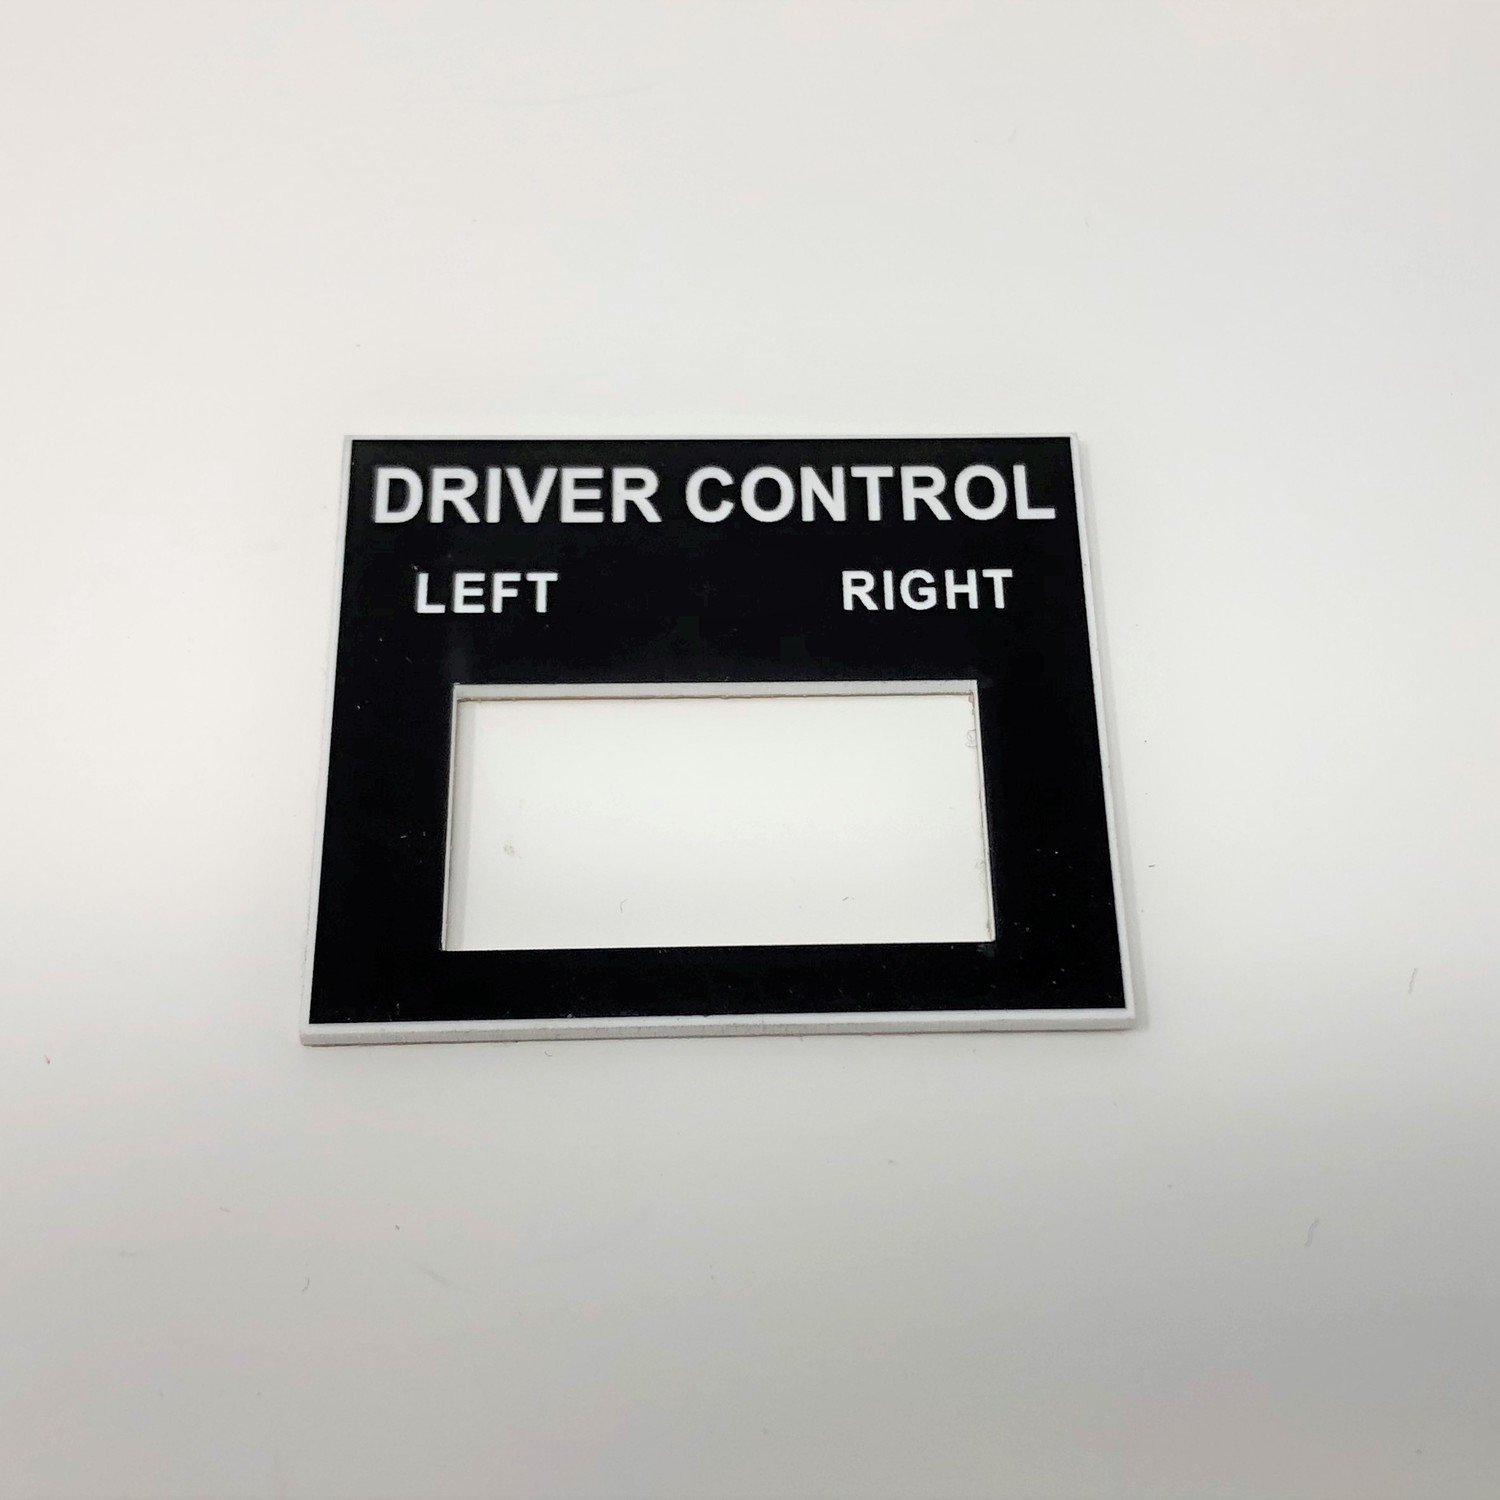 Driver Control Switch Label